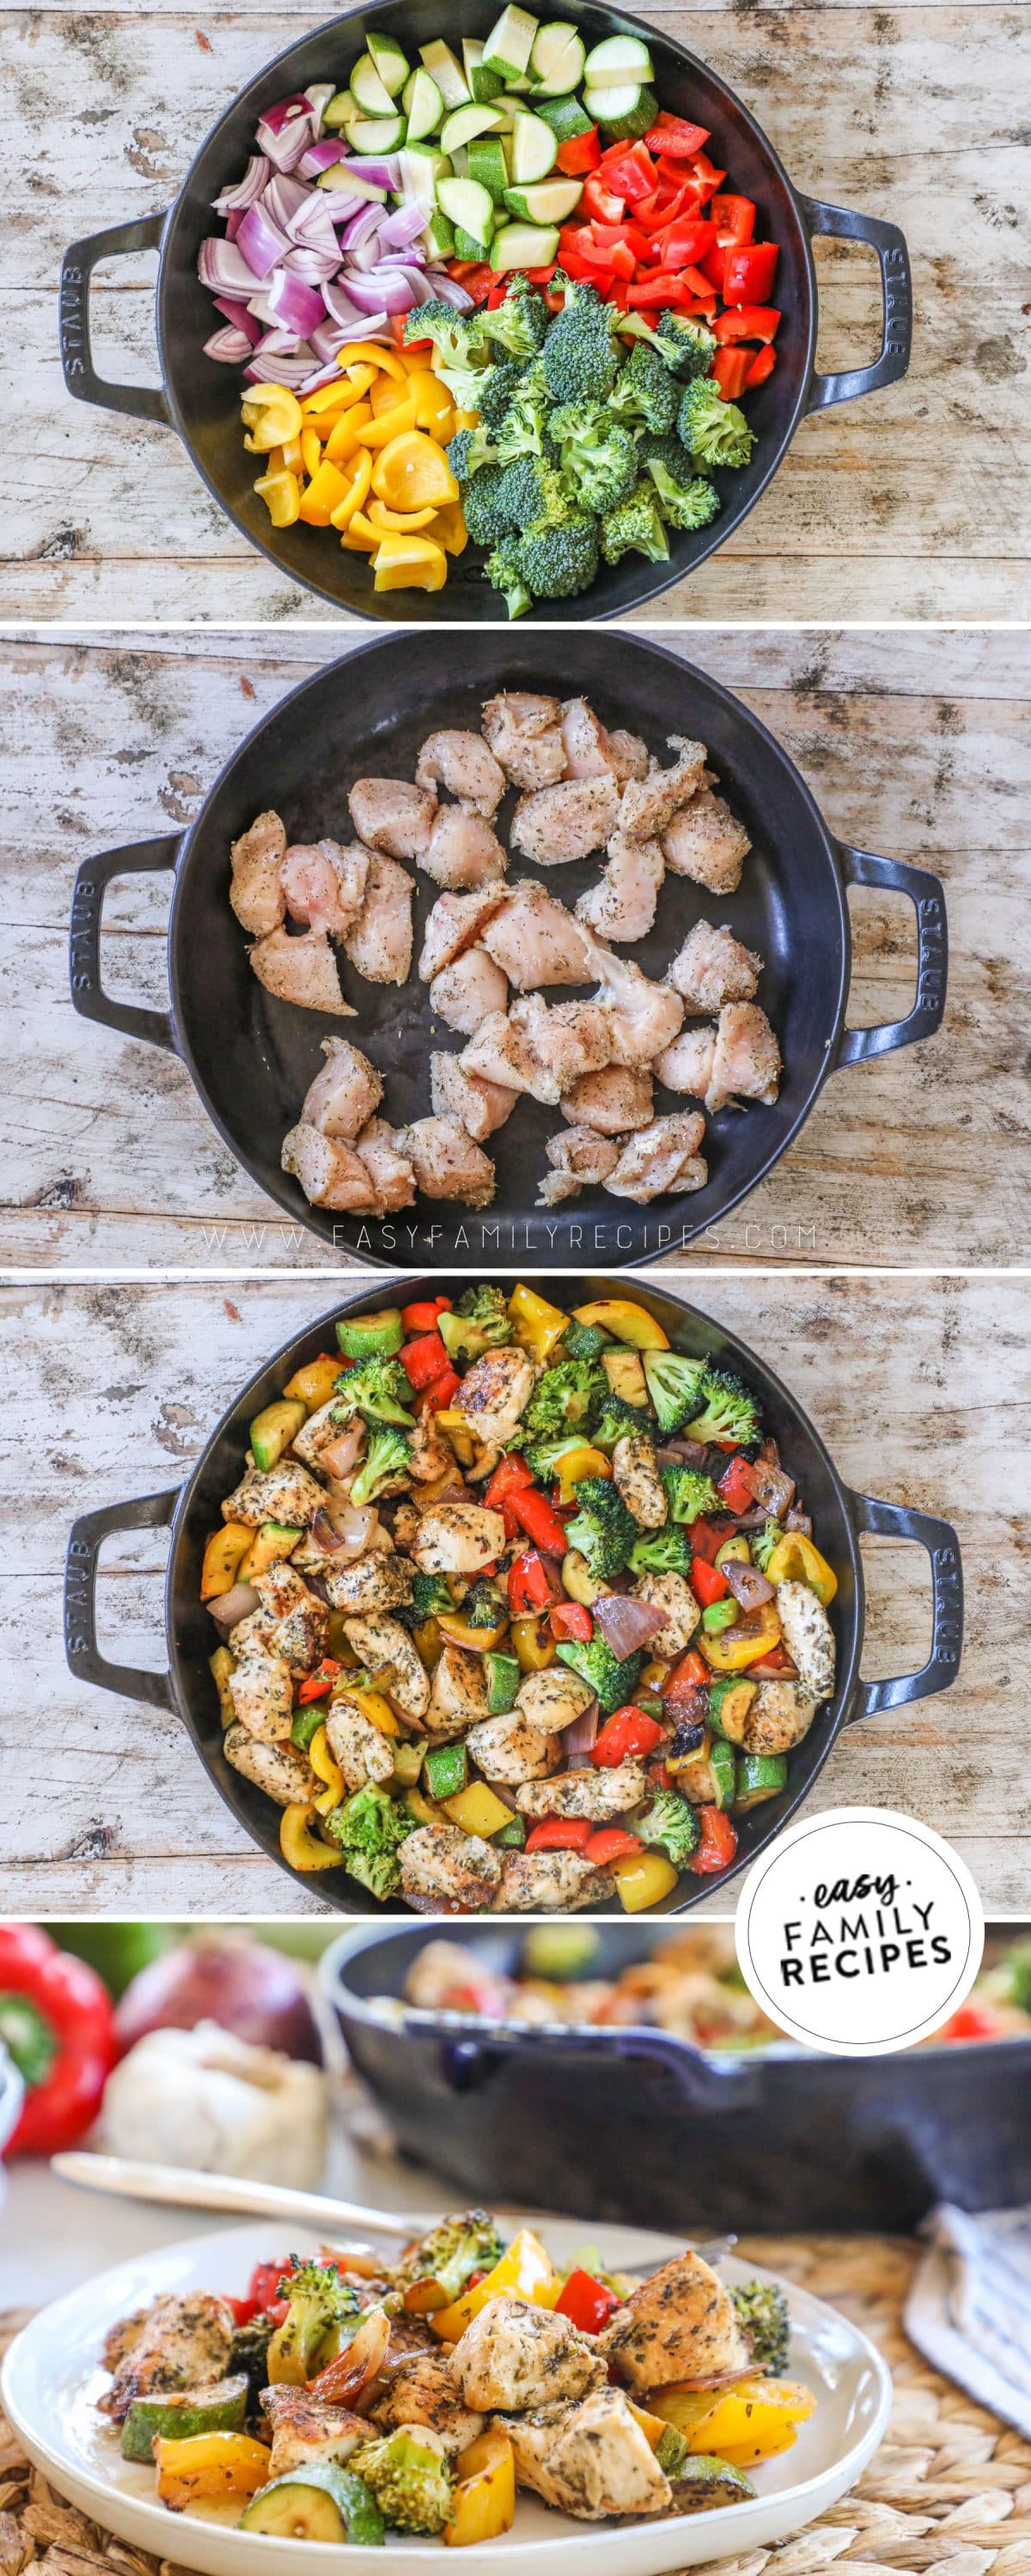 How to make one pan chicken and veggie skillet 1)sear chicken 2)sear veggies and combine with chicken 3)mix together 4)serve